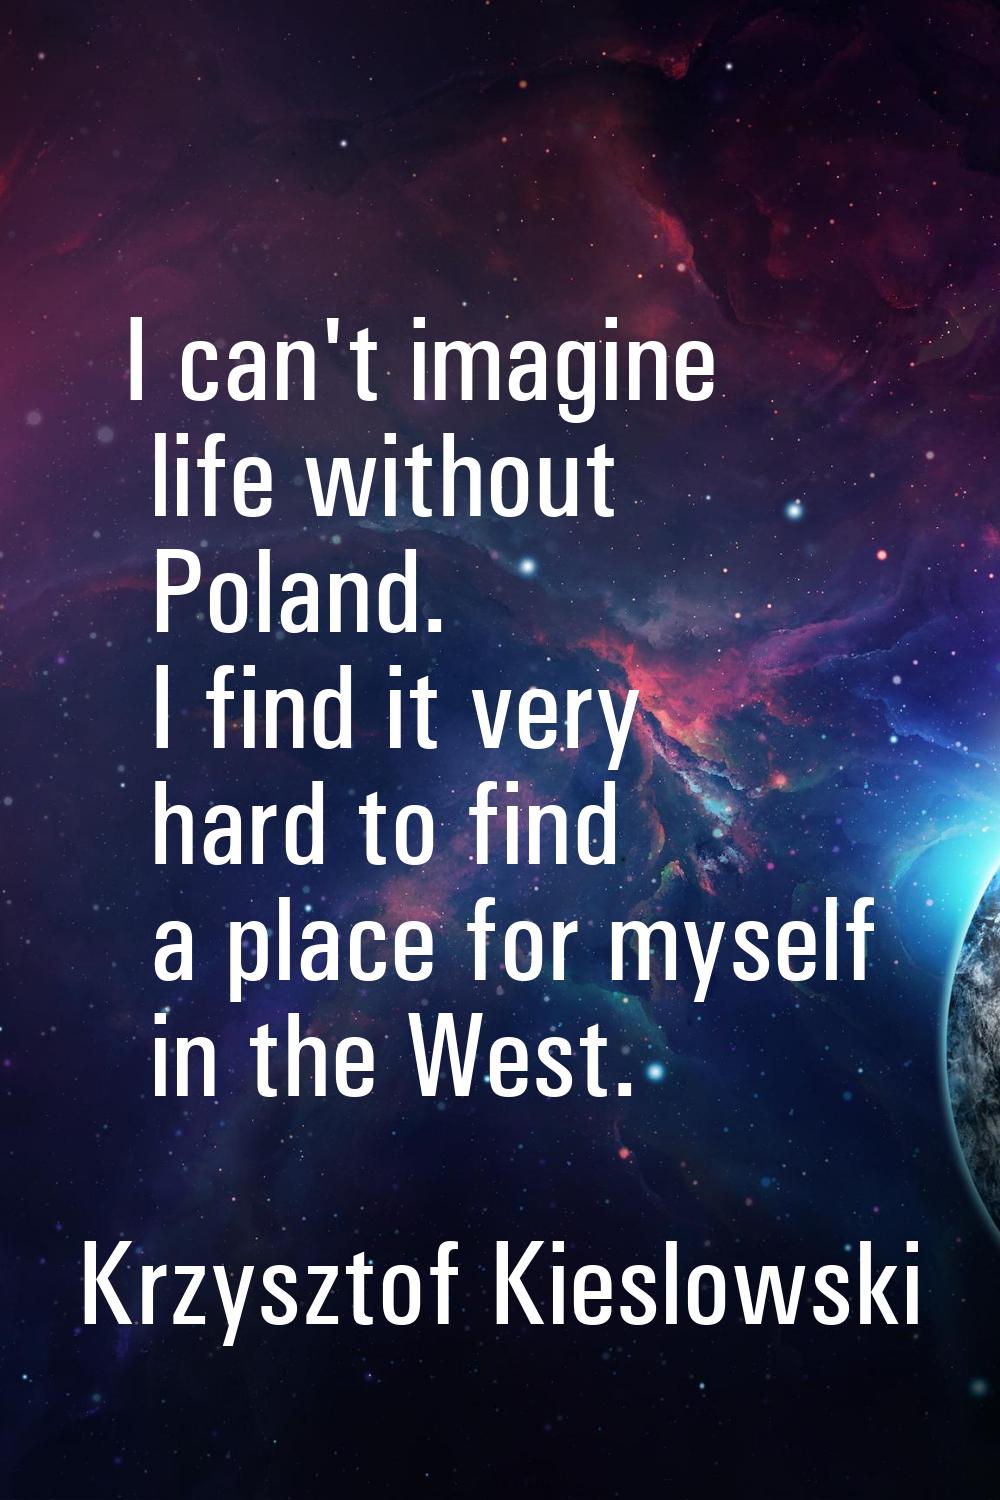 I can't imagine life without Poland. I find it very hard to find a place for myself in the West.